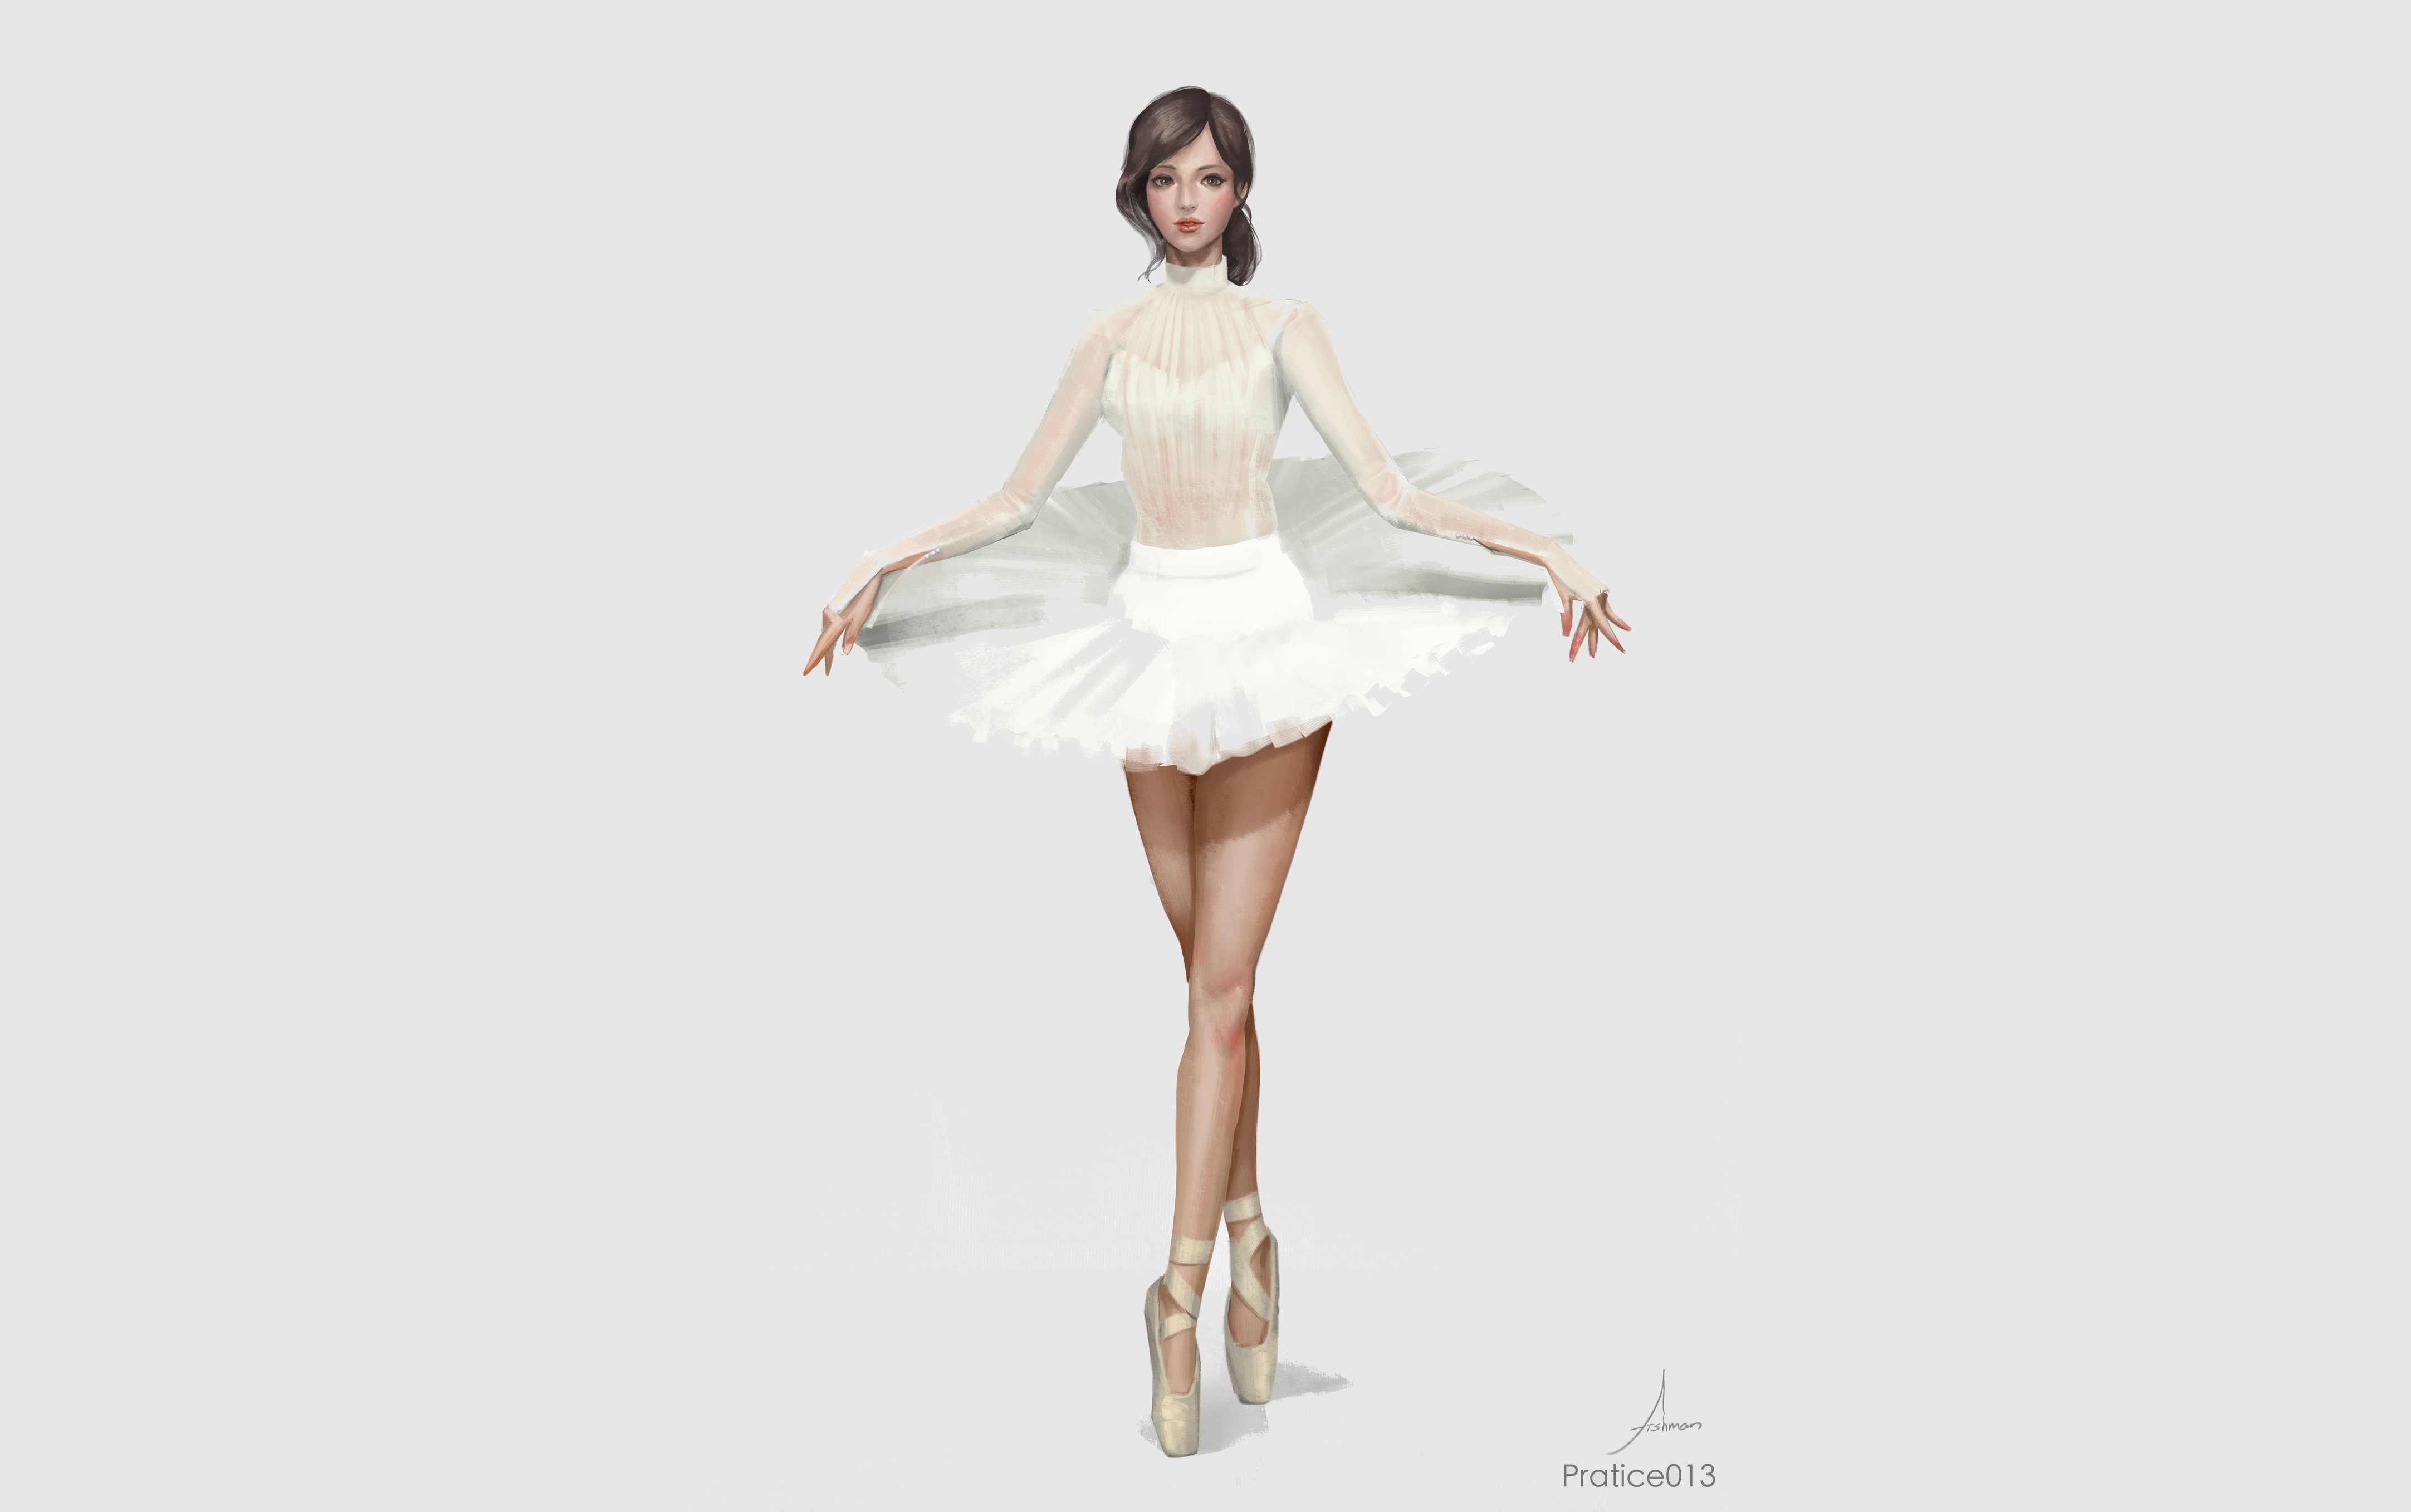 Ballet Images Free Wallpapers